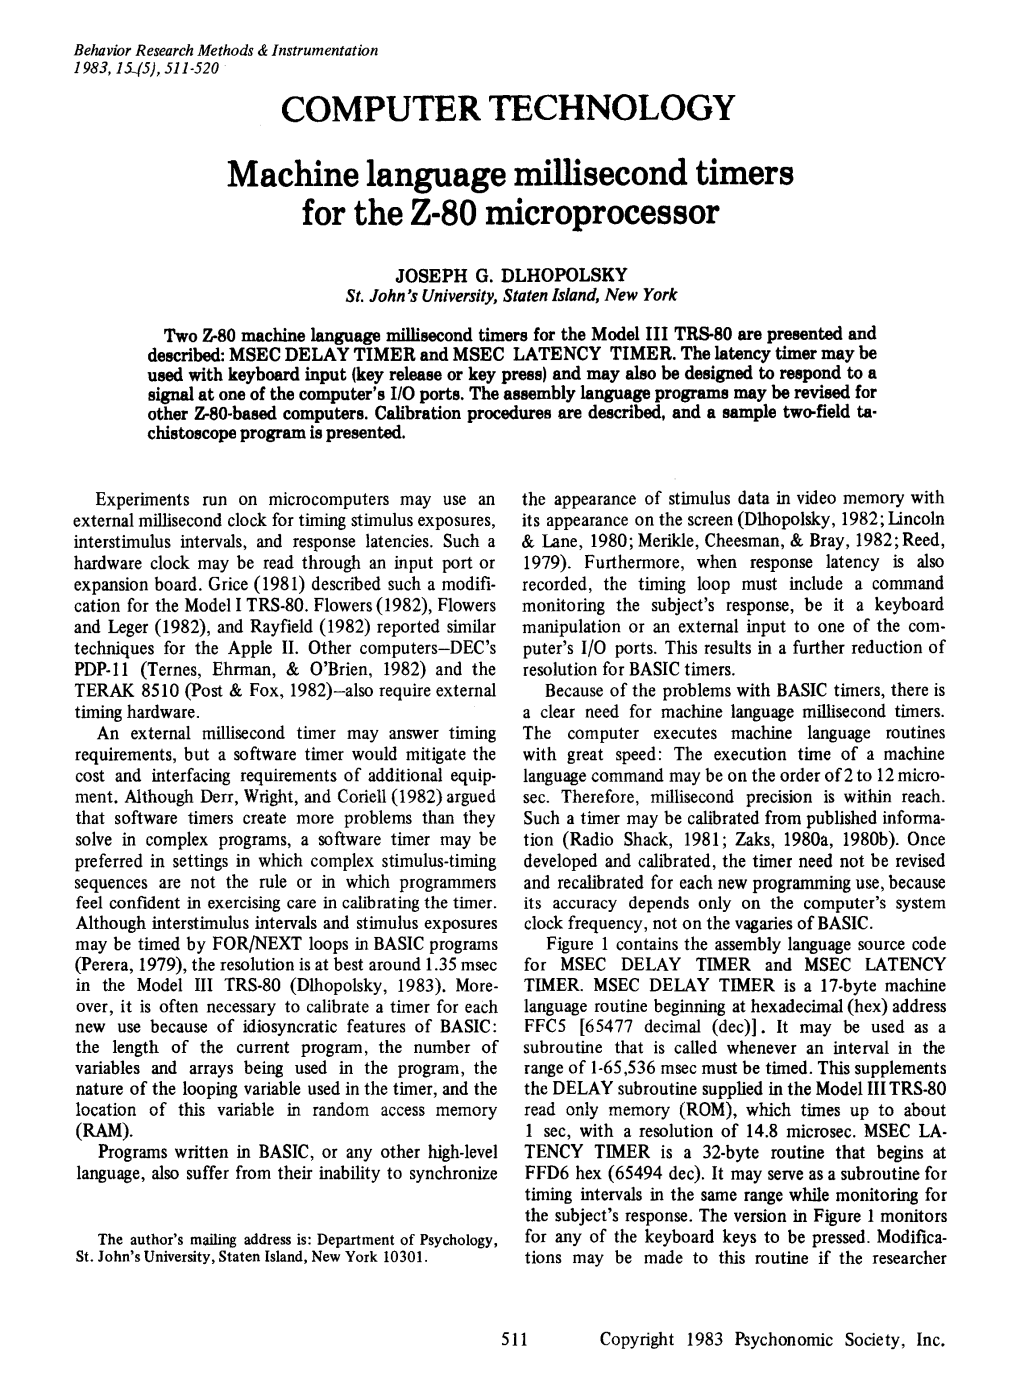 Machine Language Millisecond Timers for the Z-80 Microprocessor